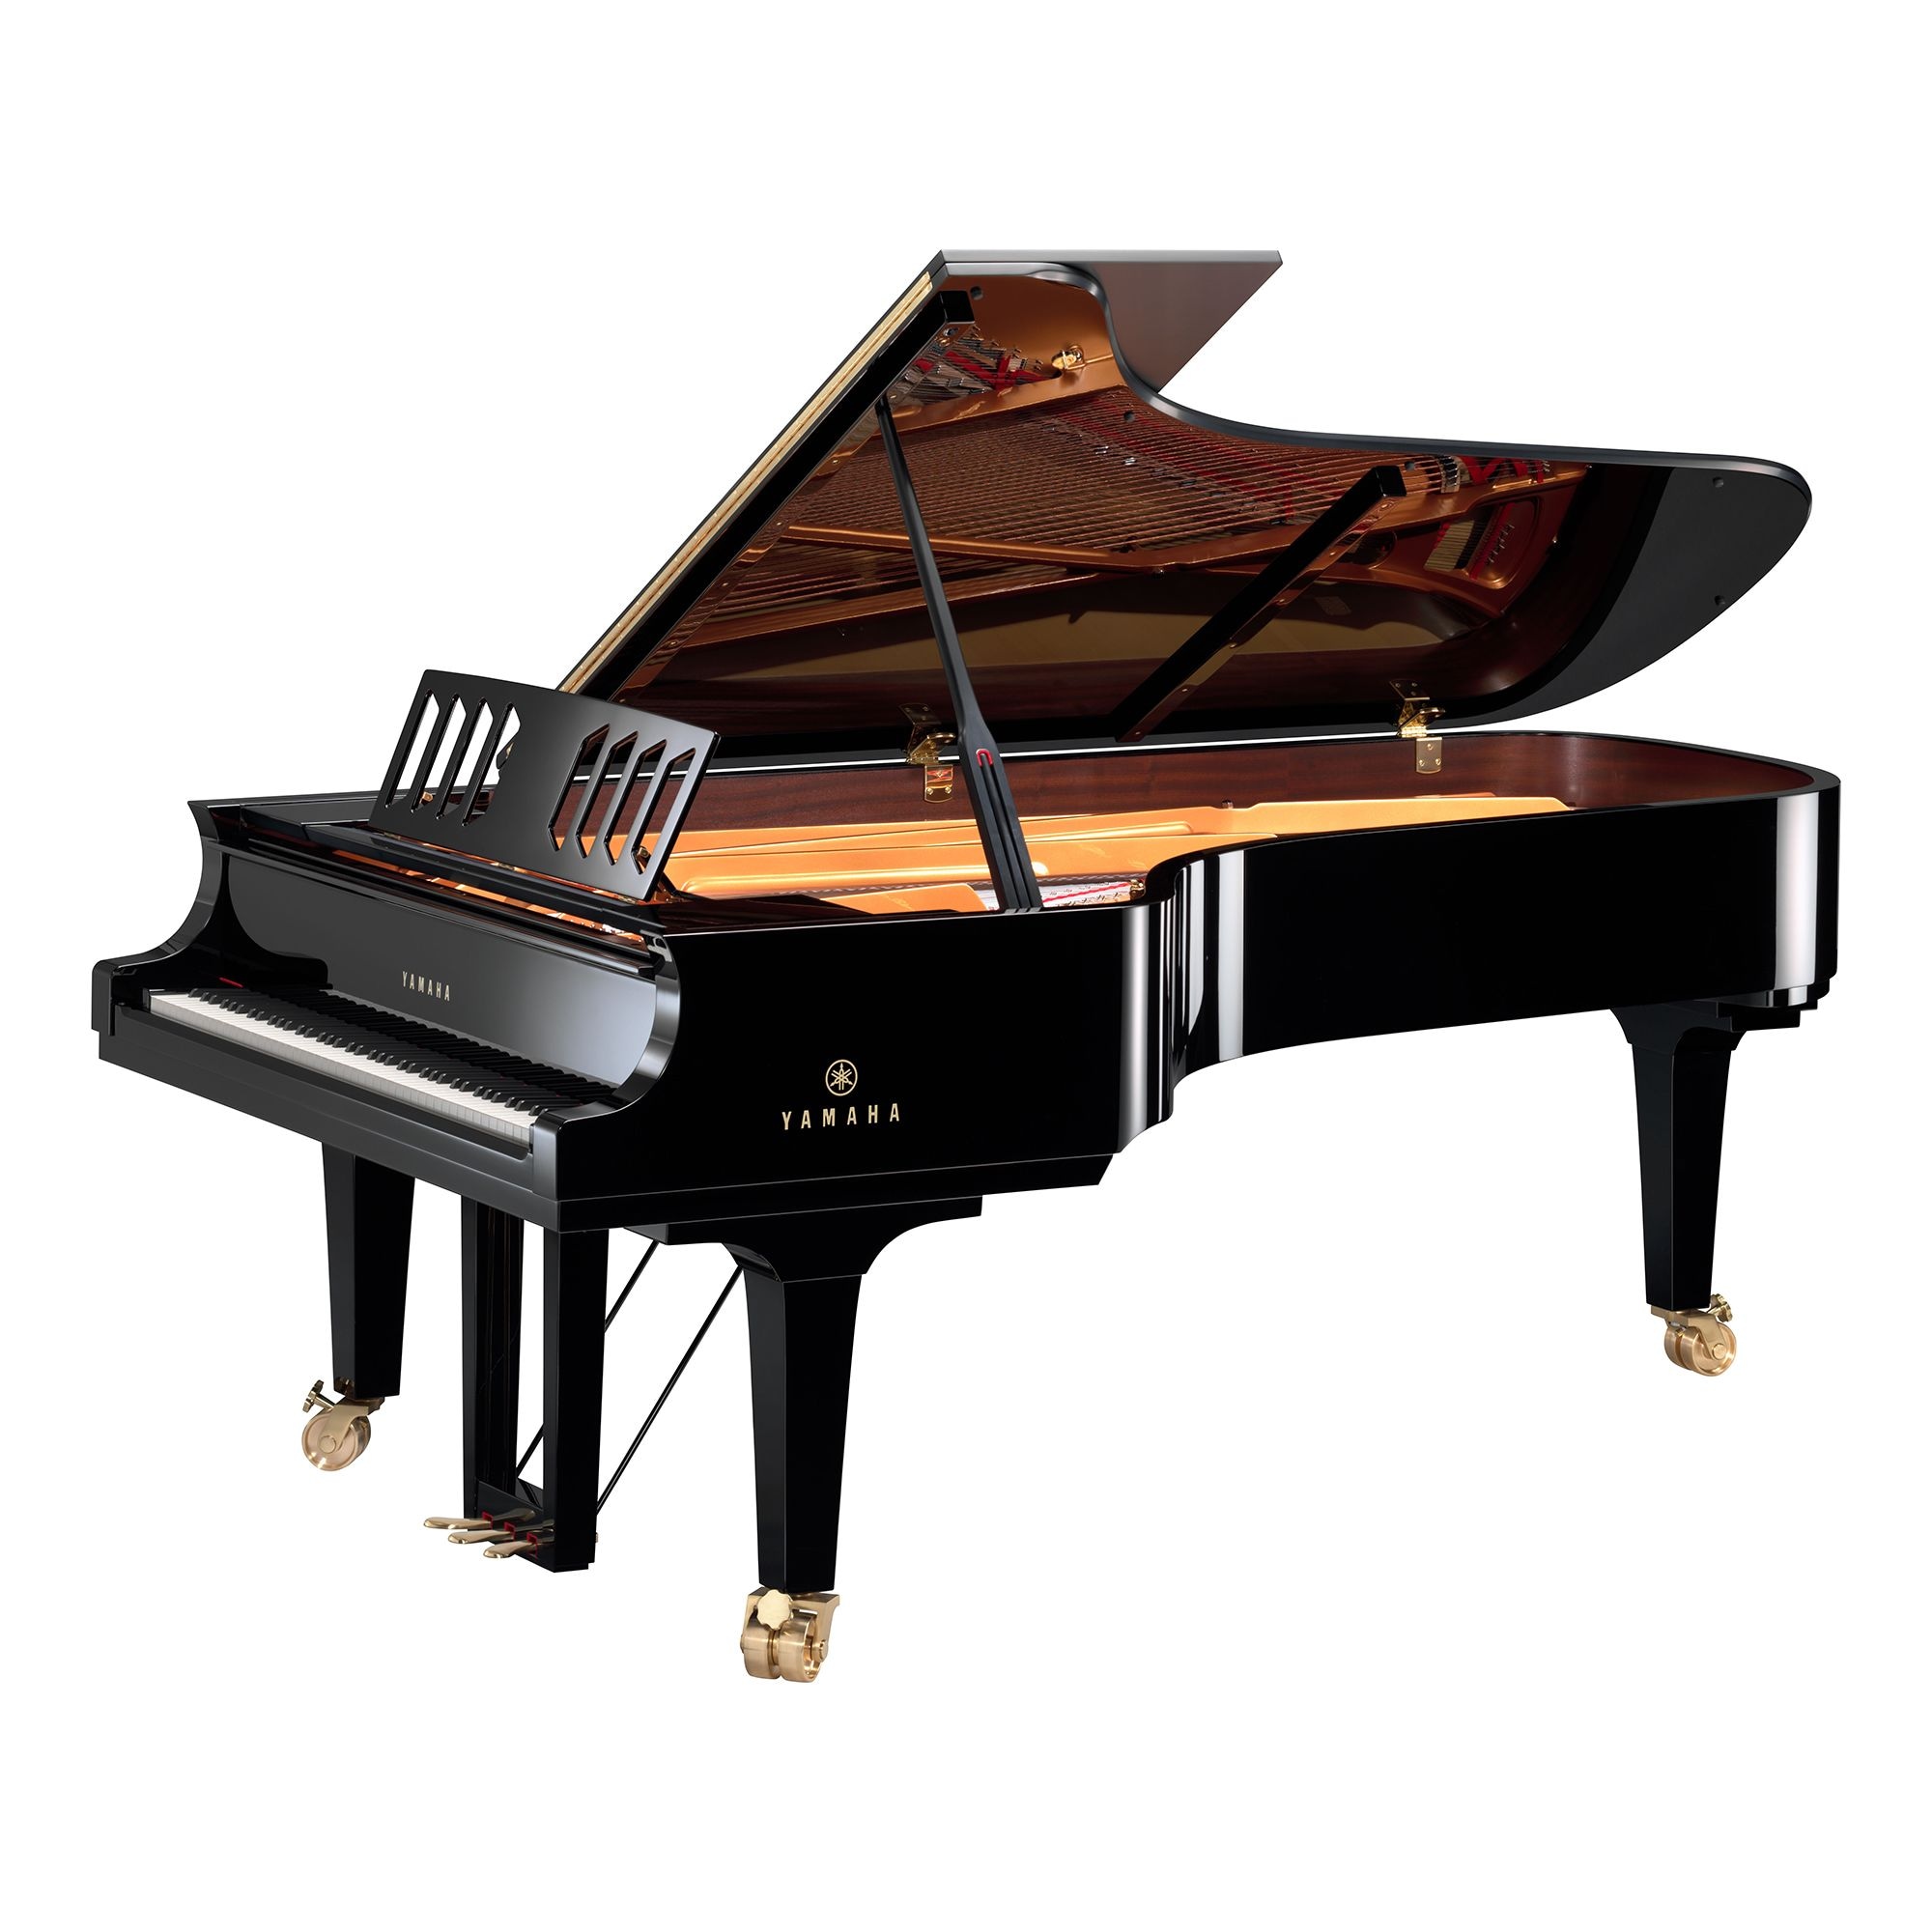 símbolo cepillo inoxidable CFX - Overview - GRAND PIANOS - Pianos - Musical Instruments - Products -  Yamaha - Music - Australia